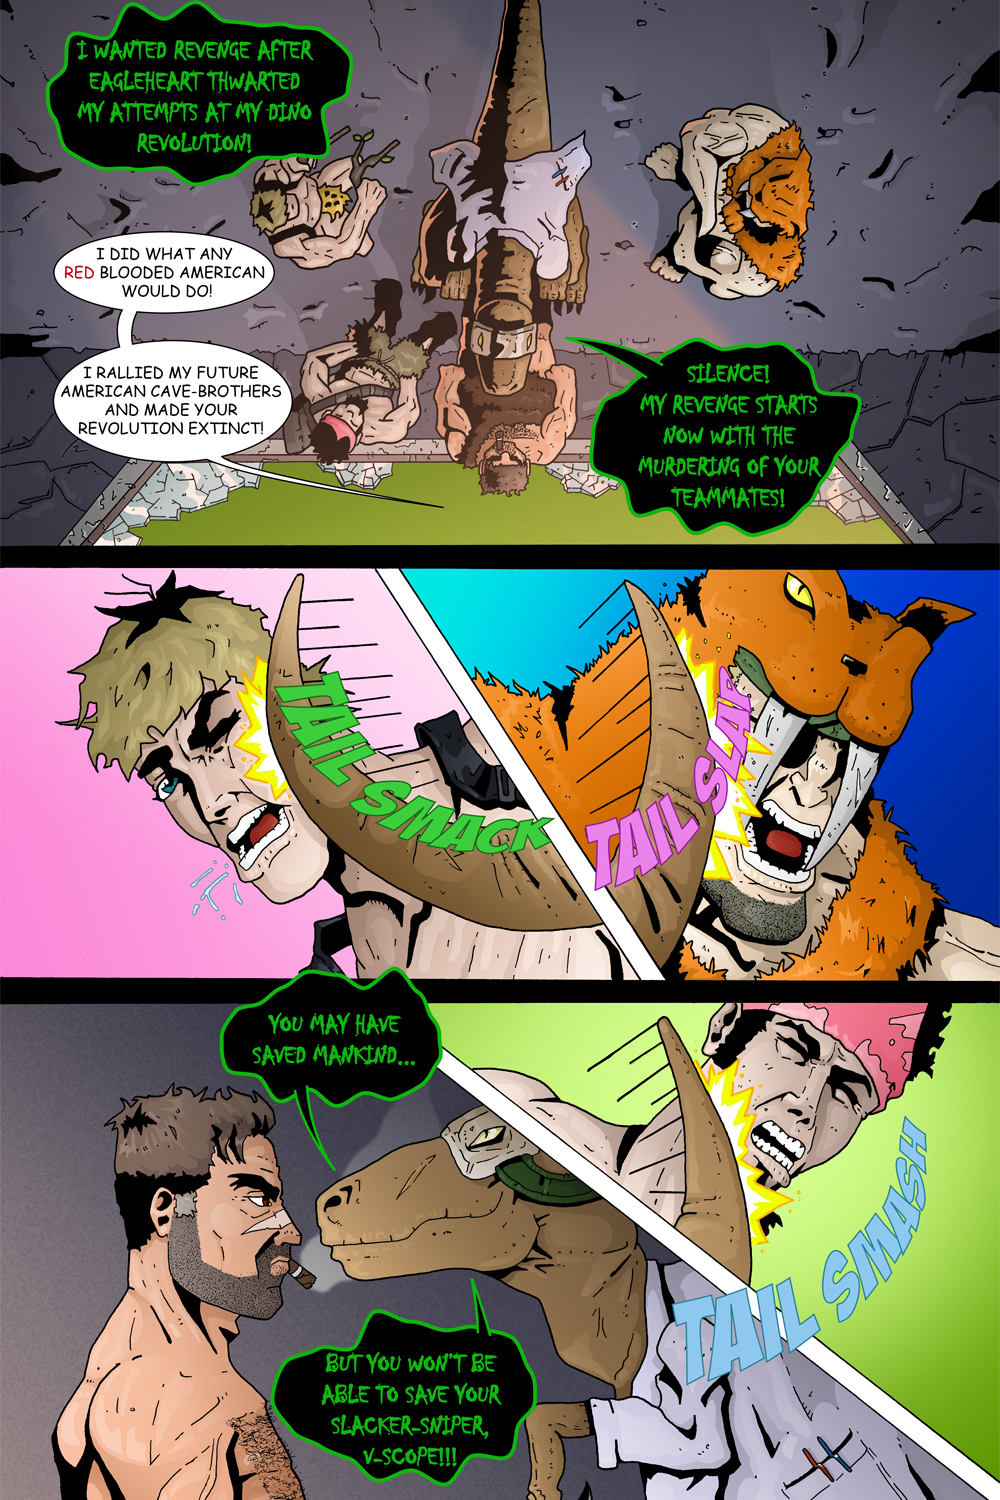 MISSION 003: PAGE 25 “SILENCE!”